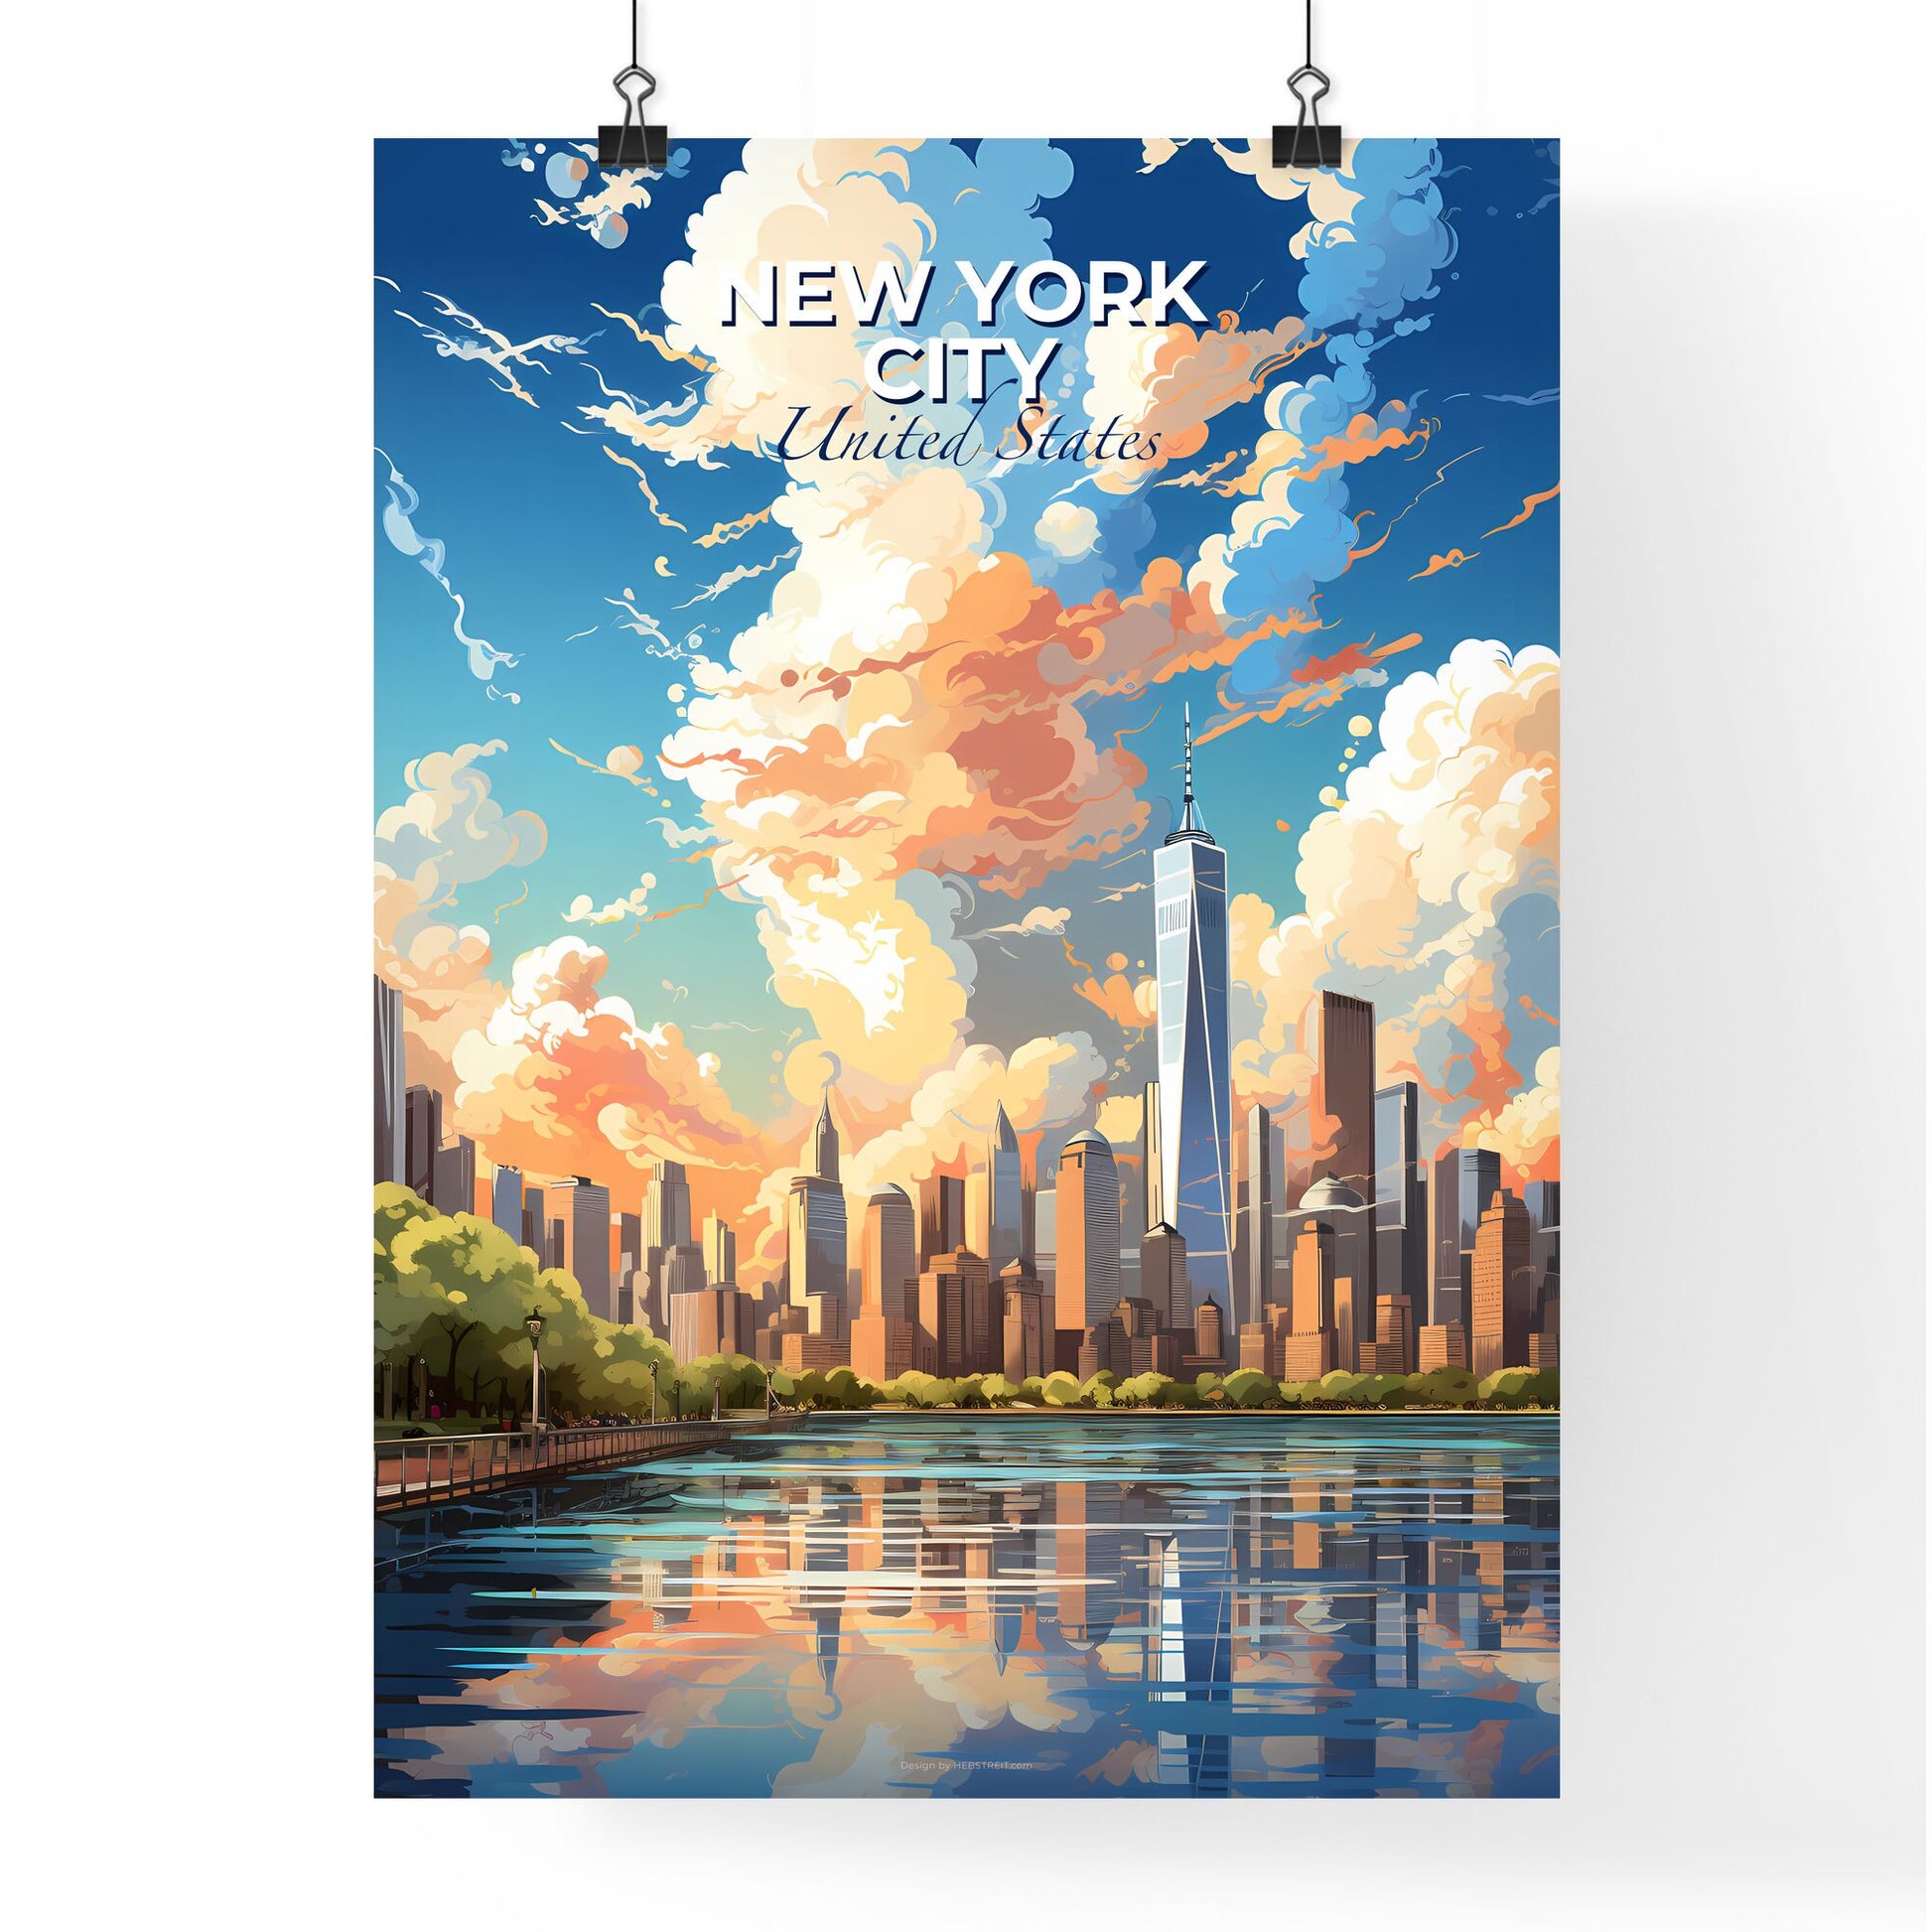 New York City Skyline - A City Skyline With Trees And A Body Of Water - Customizable Travel Gift Default Title